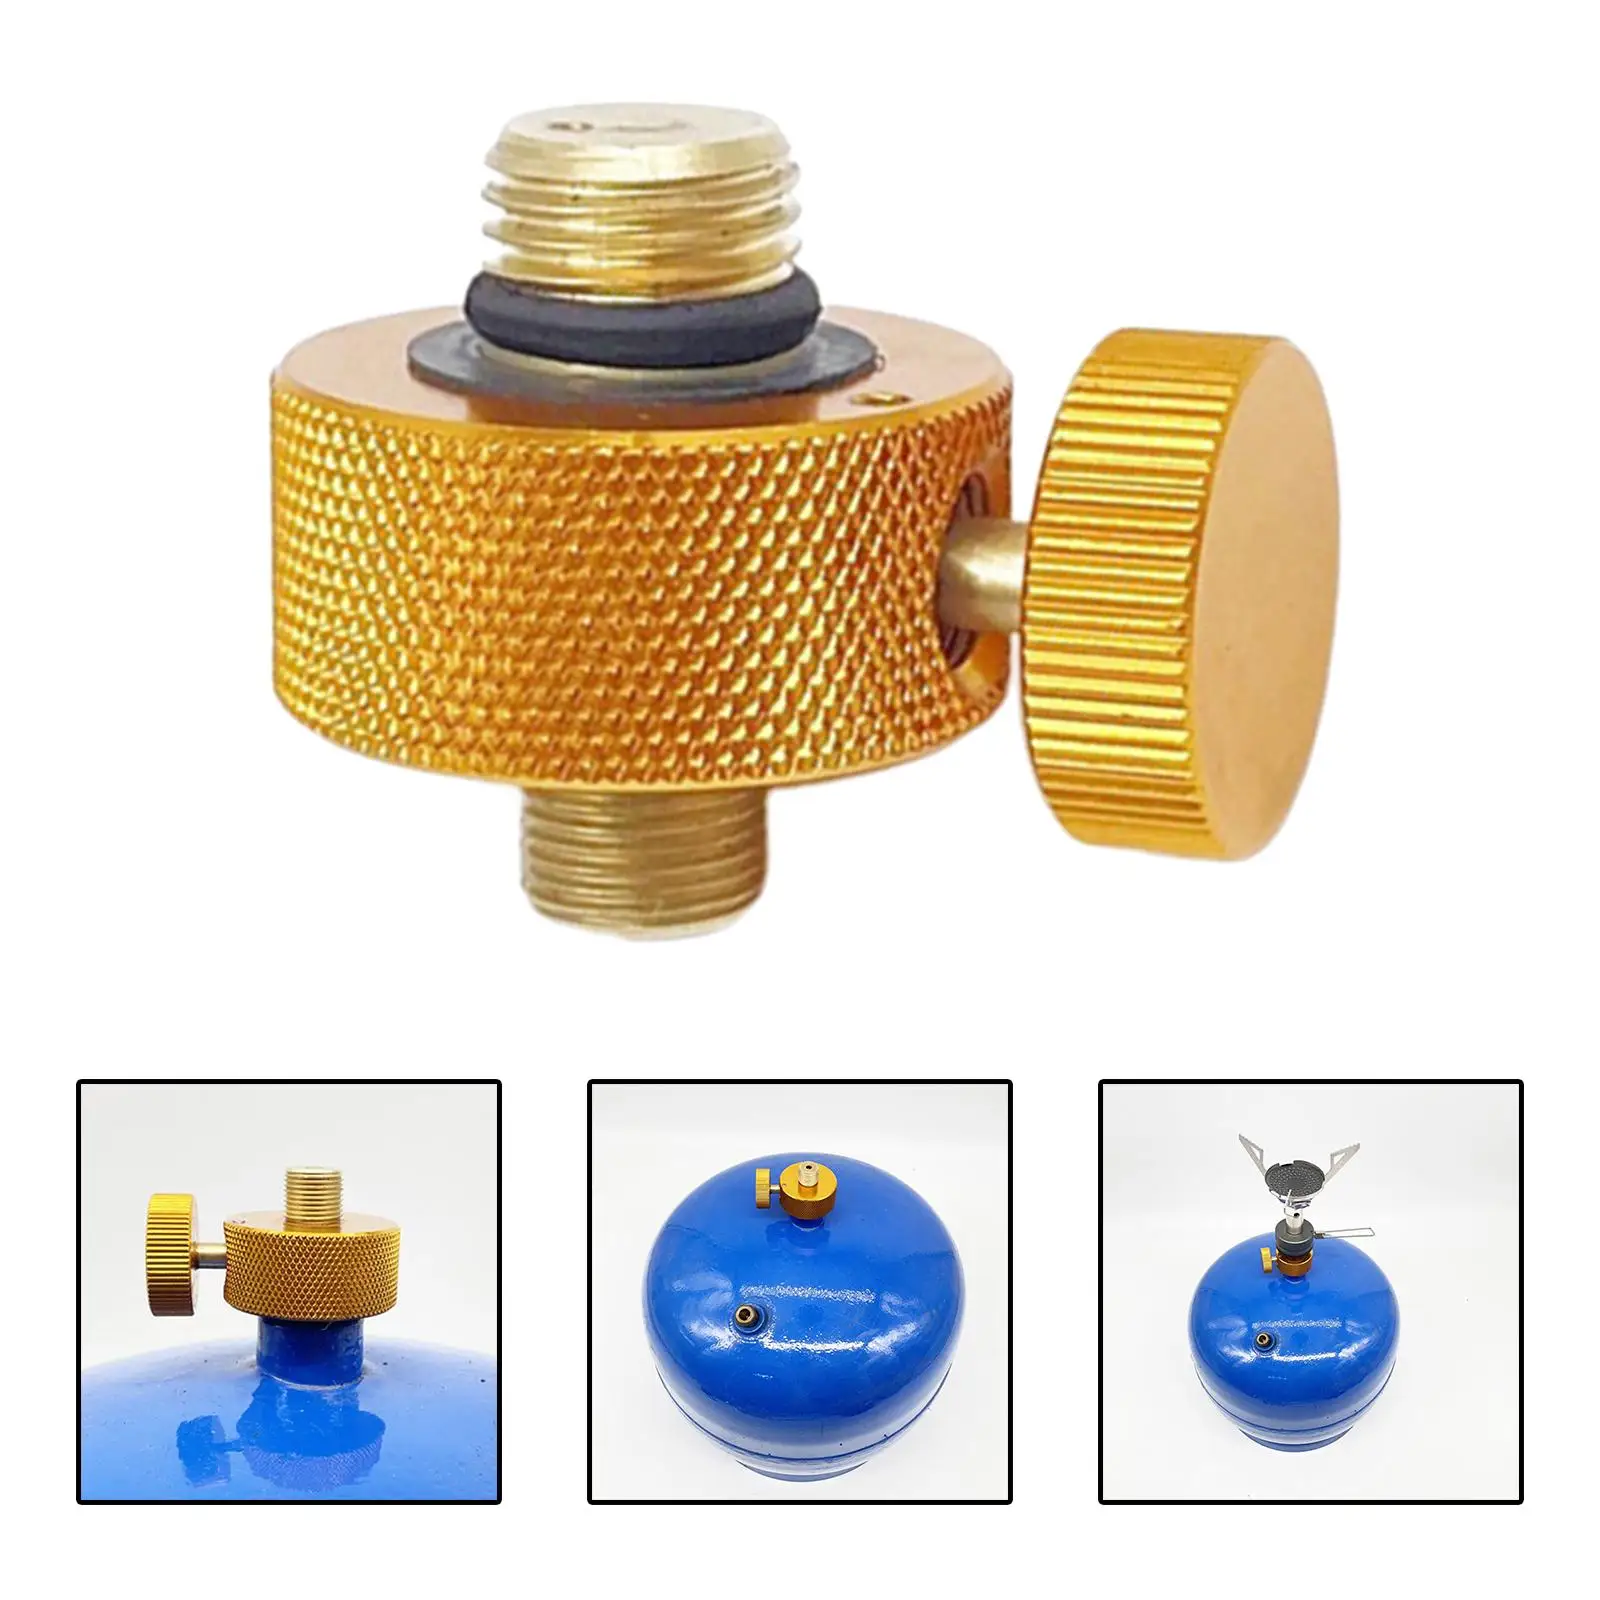 Camping Furnace Adapter Gas Tank Adapter Convertor Connection Split Type Convert Fuel Canister Metal Adapter for Hiking Camping